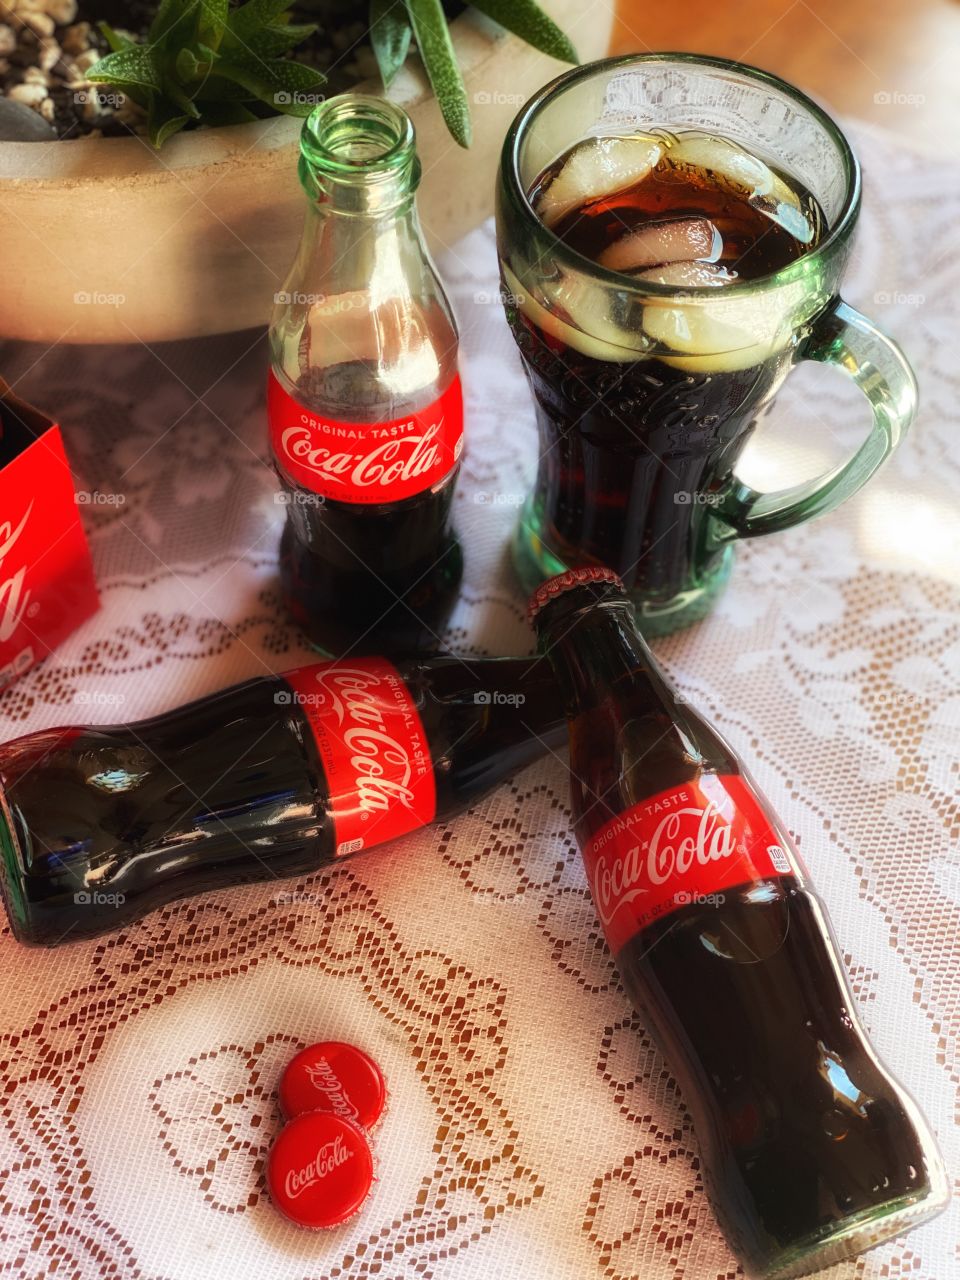 Three Coca Cola bottles on a table 